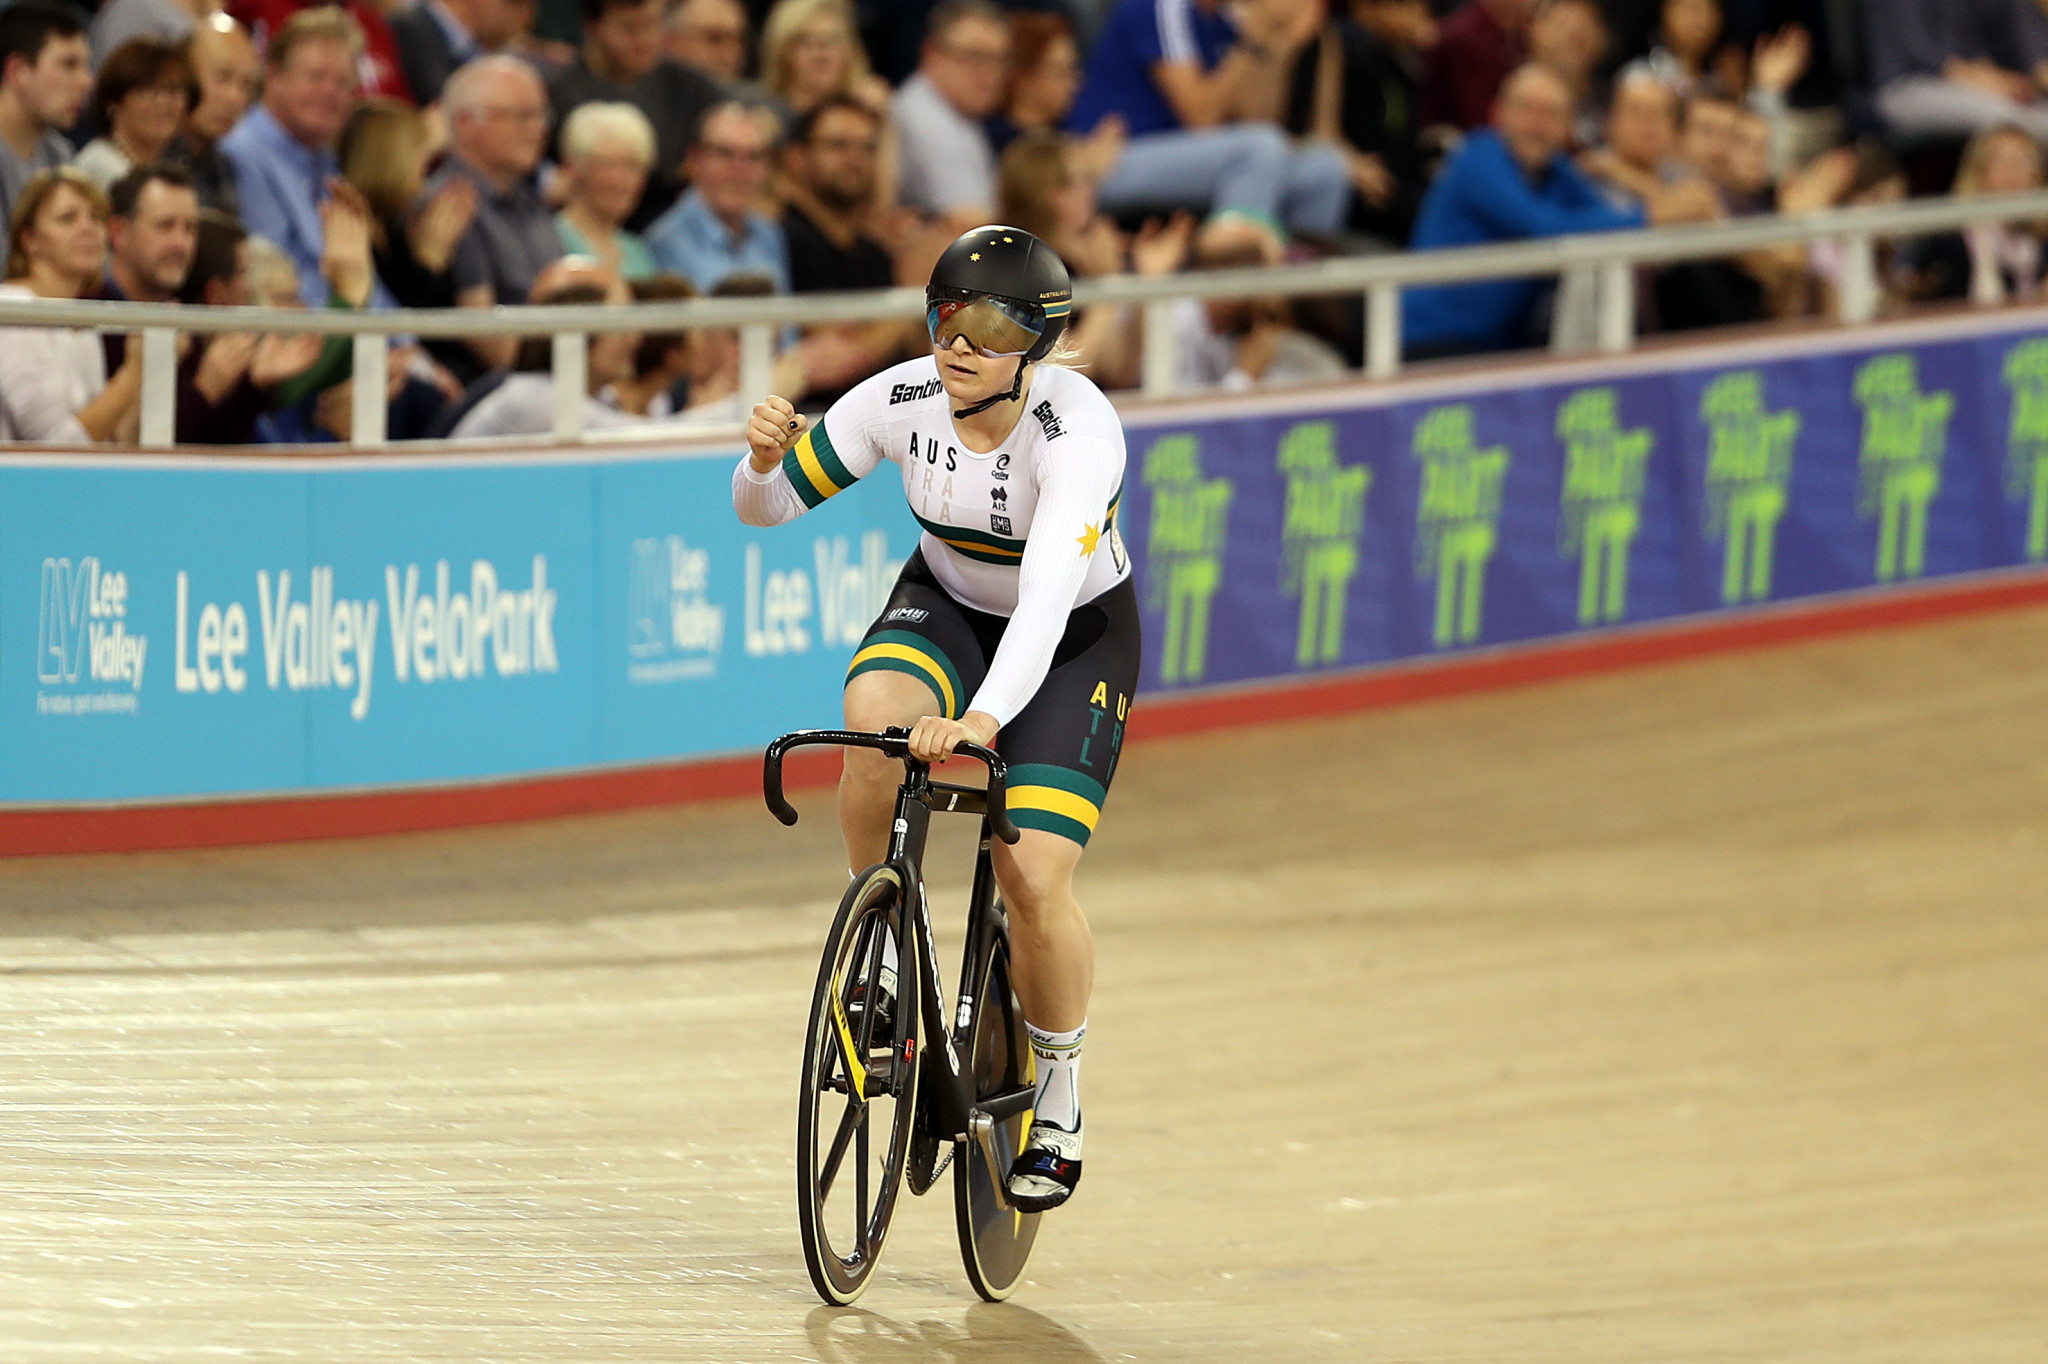 Morton wins women's sprint event at UCI Track World Cup in London